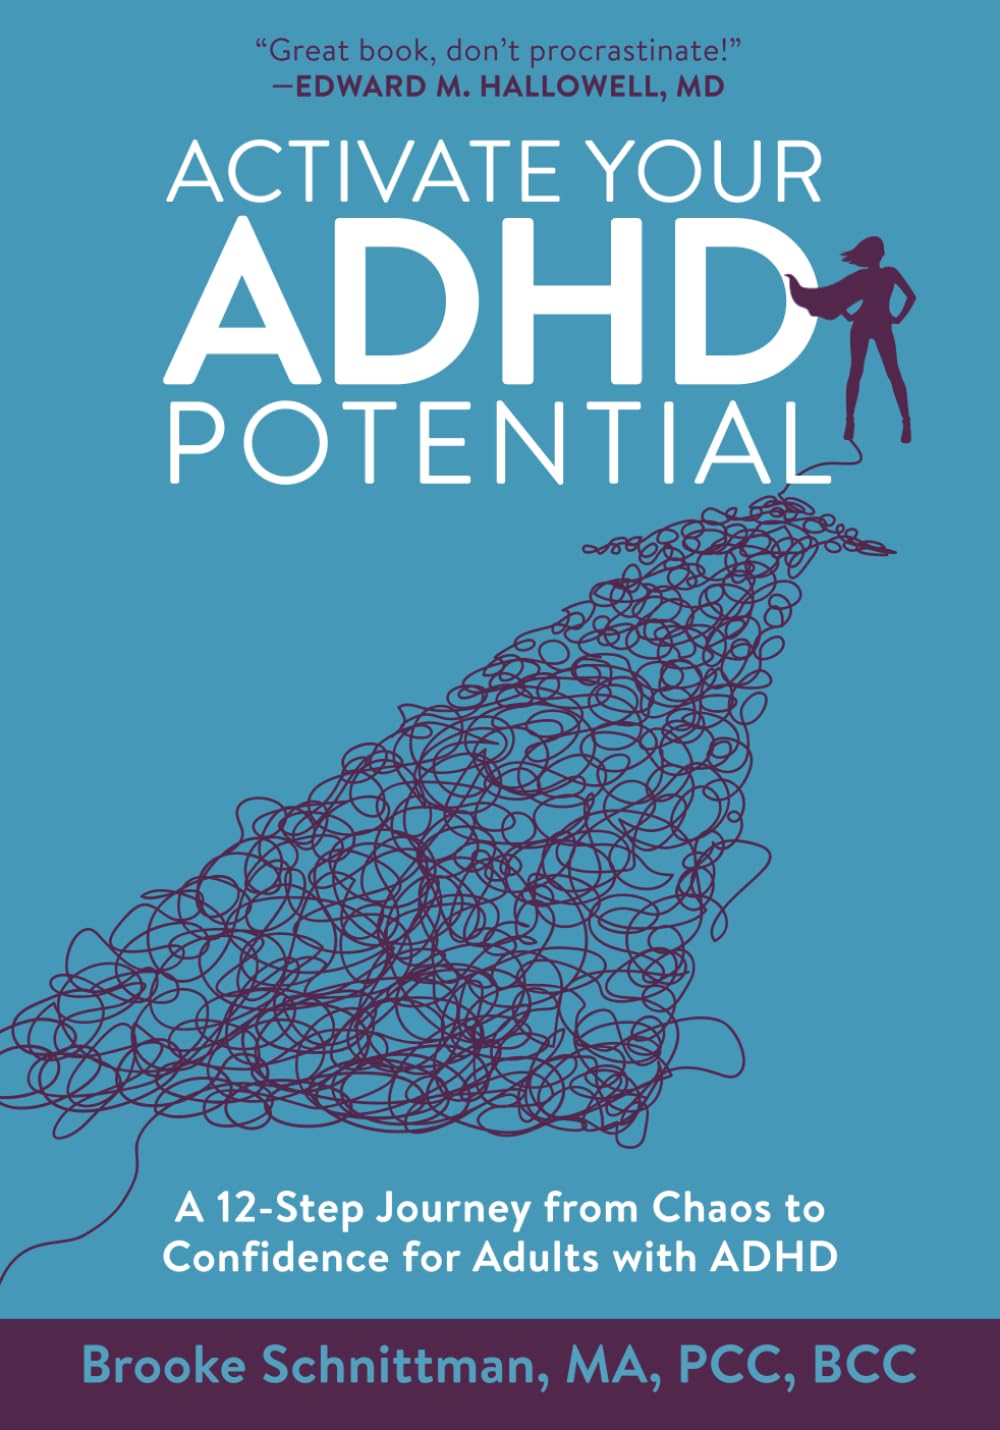 Activate Your ADHD Potential: A 12-Step Journey from Chaos to Confidence for Adults With ADHD